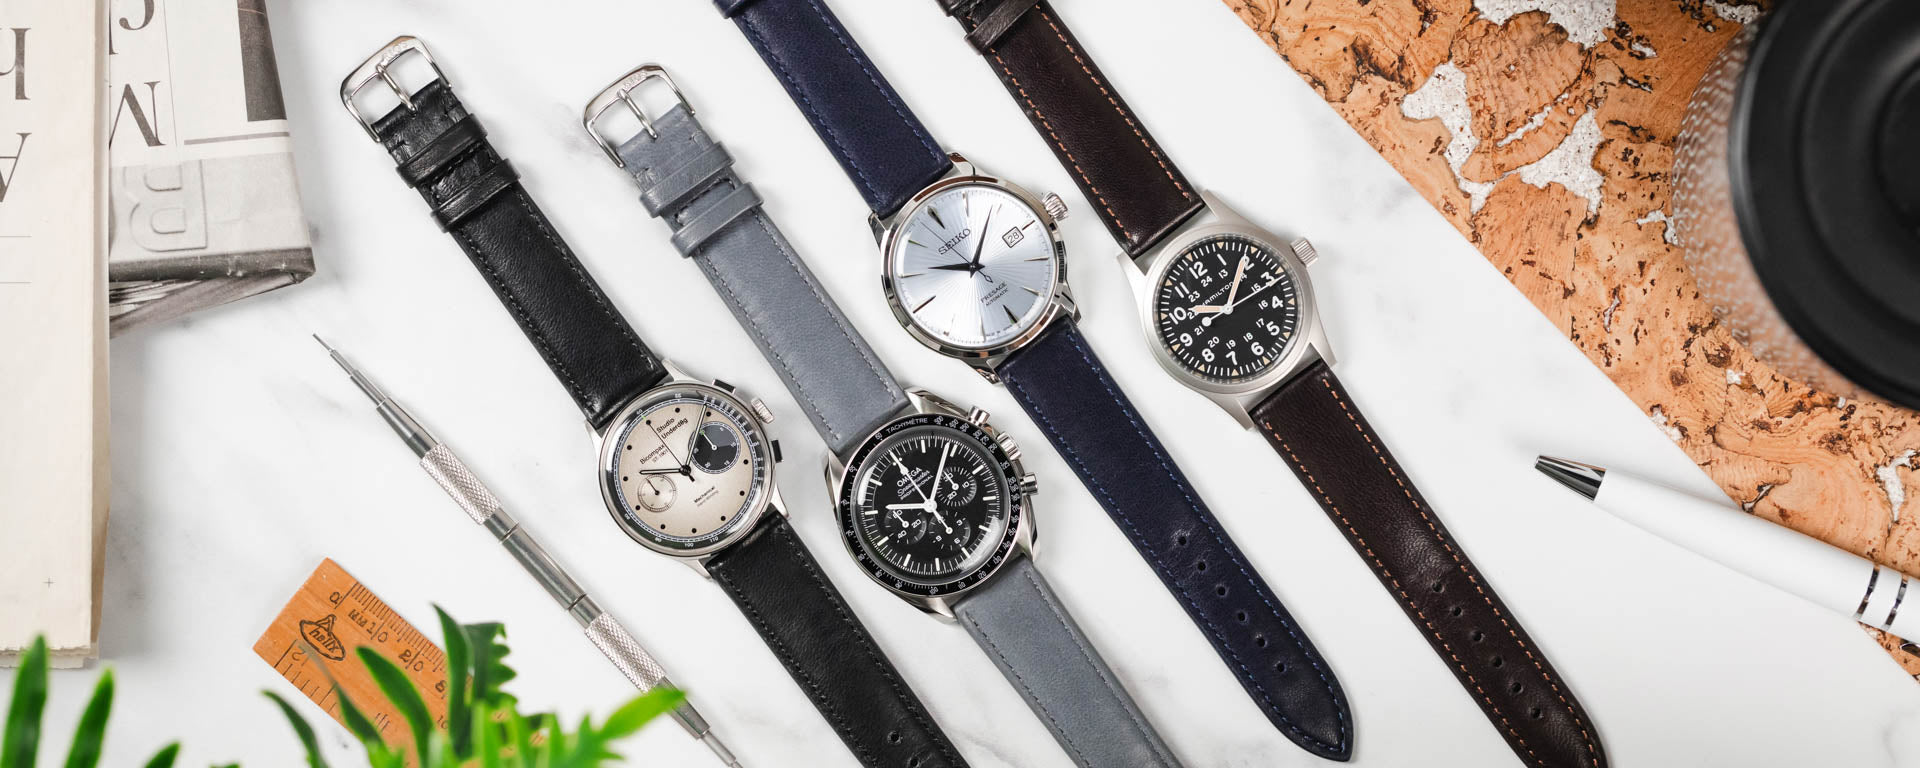 Lay Flat image of four watches, Omega Speedmaster Professional, Studio Underd0g Go0fy Panda, Seiko Presage Cocktail Time & Hamilton Khaki Field, fitted to various colours of RIOS1931 Merino Genuine Lambskin Strap against a marble background